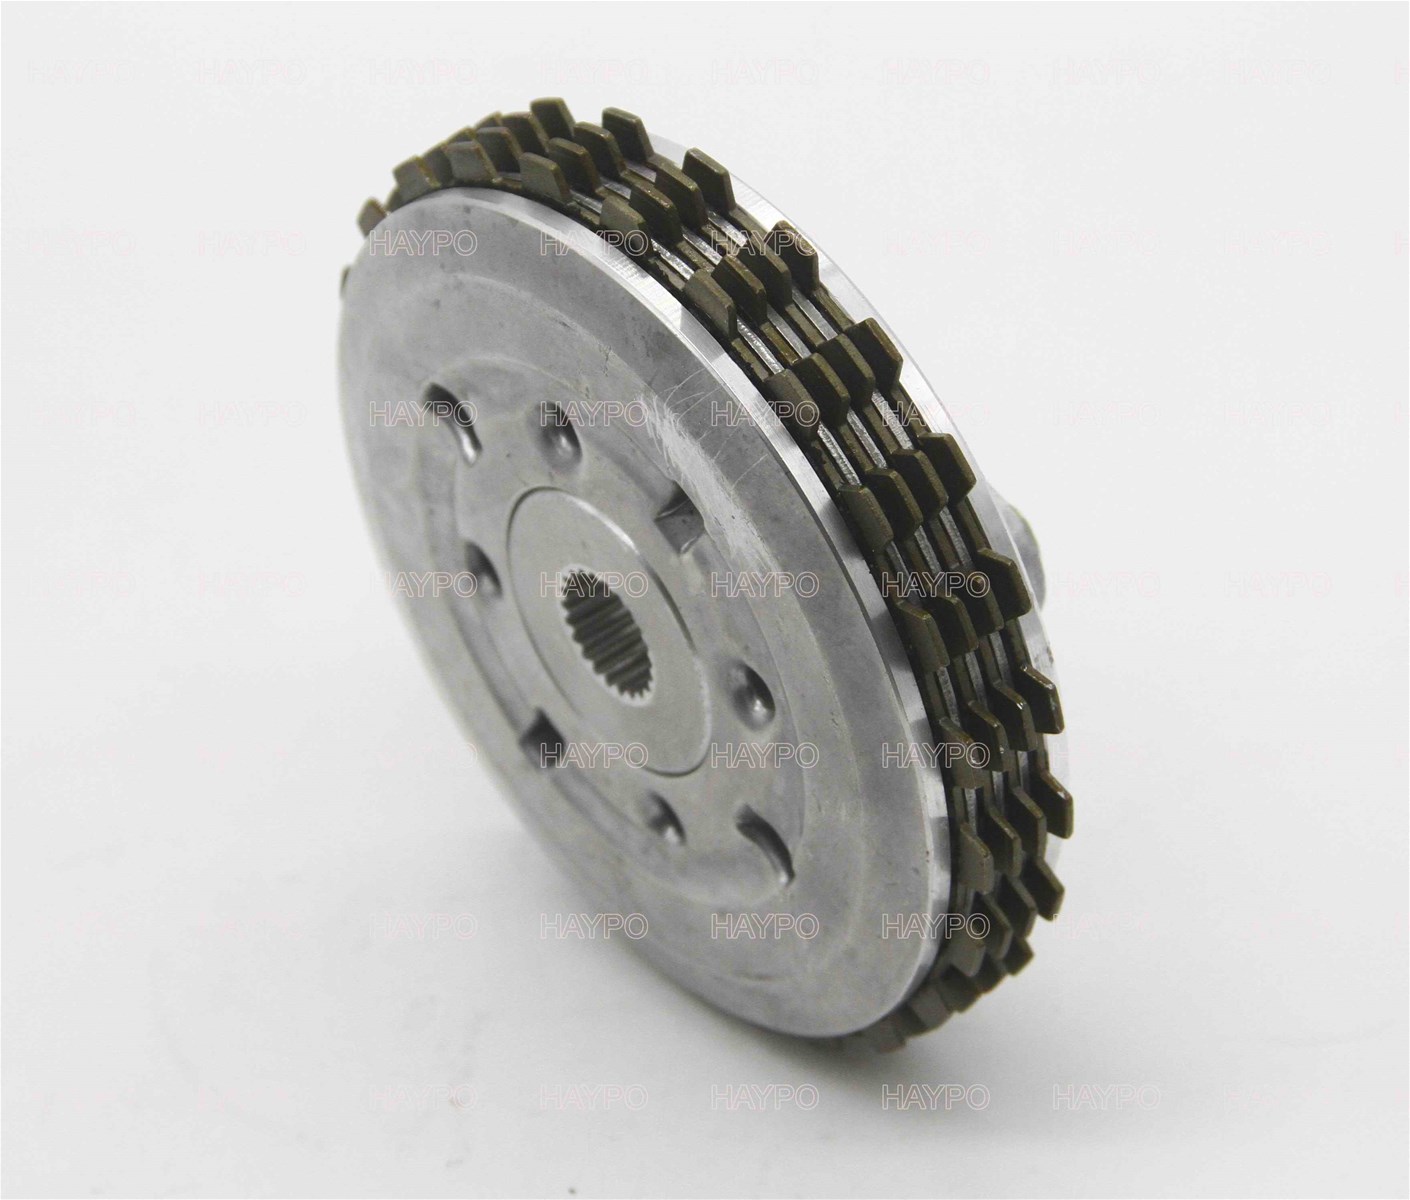 Motorcycle parts for CLUTCH HUB